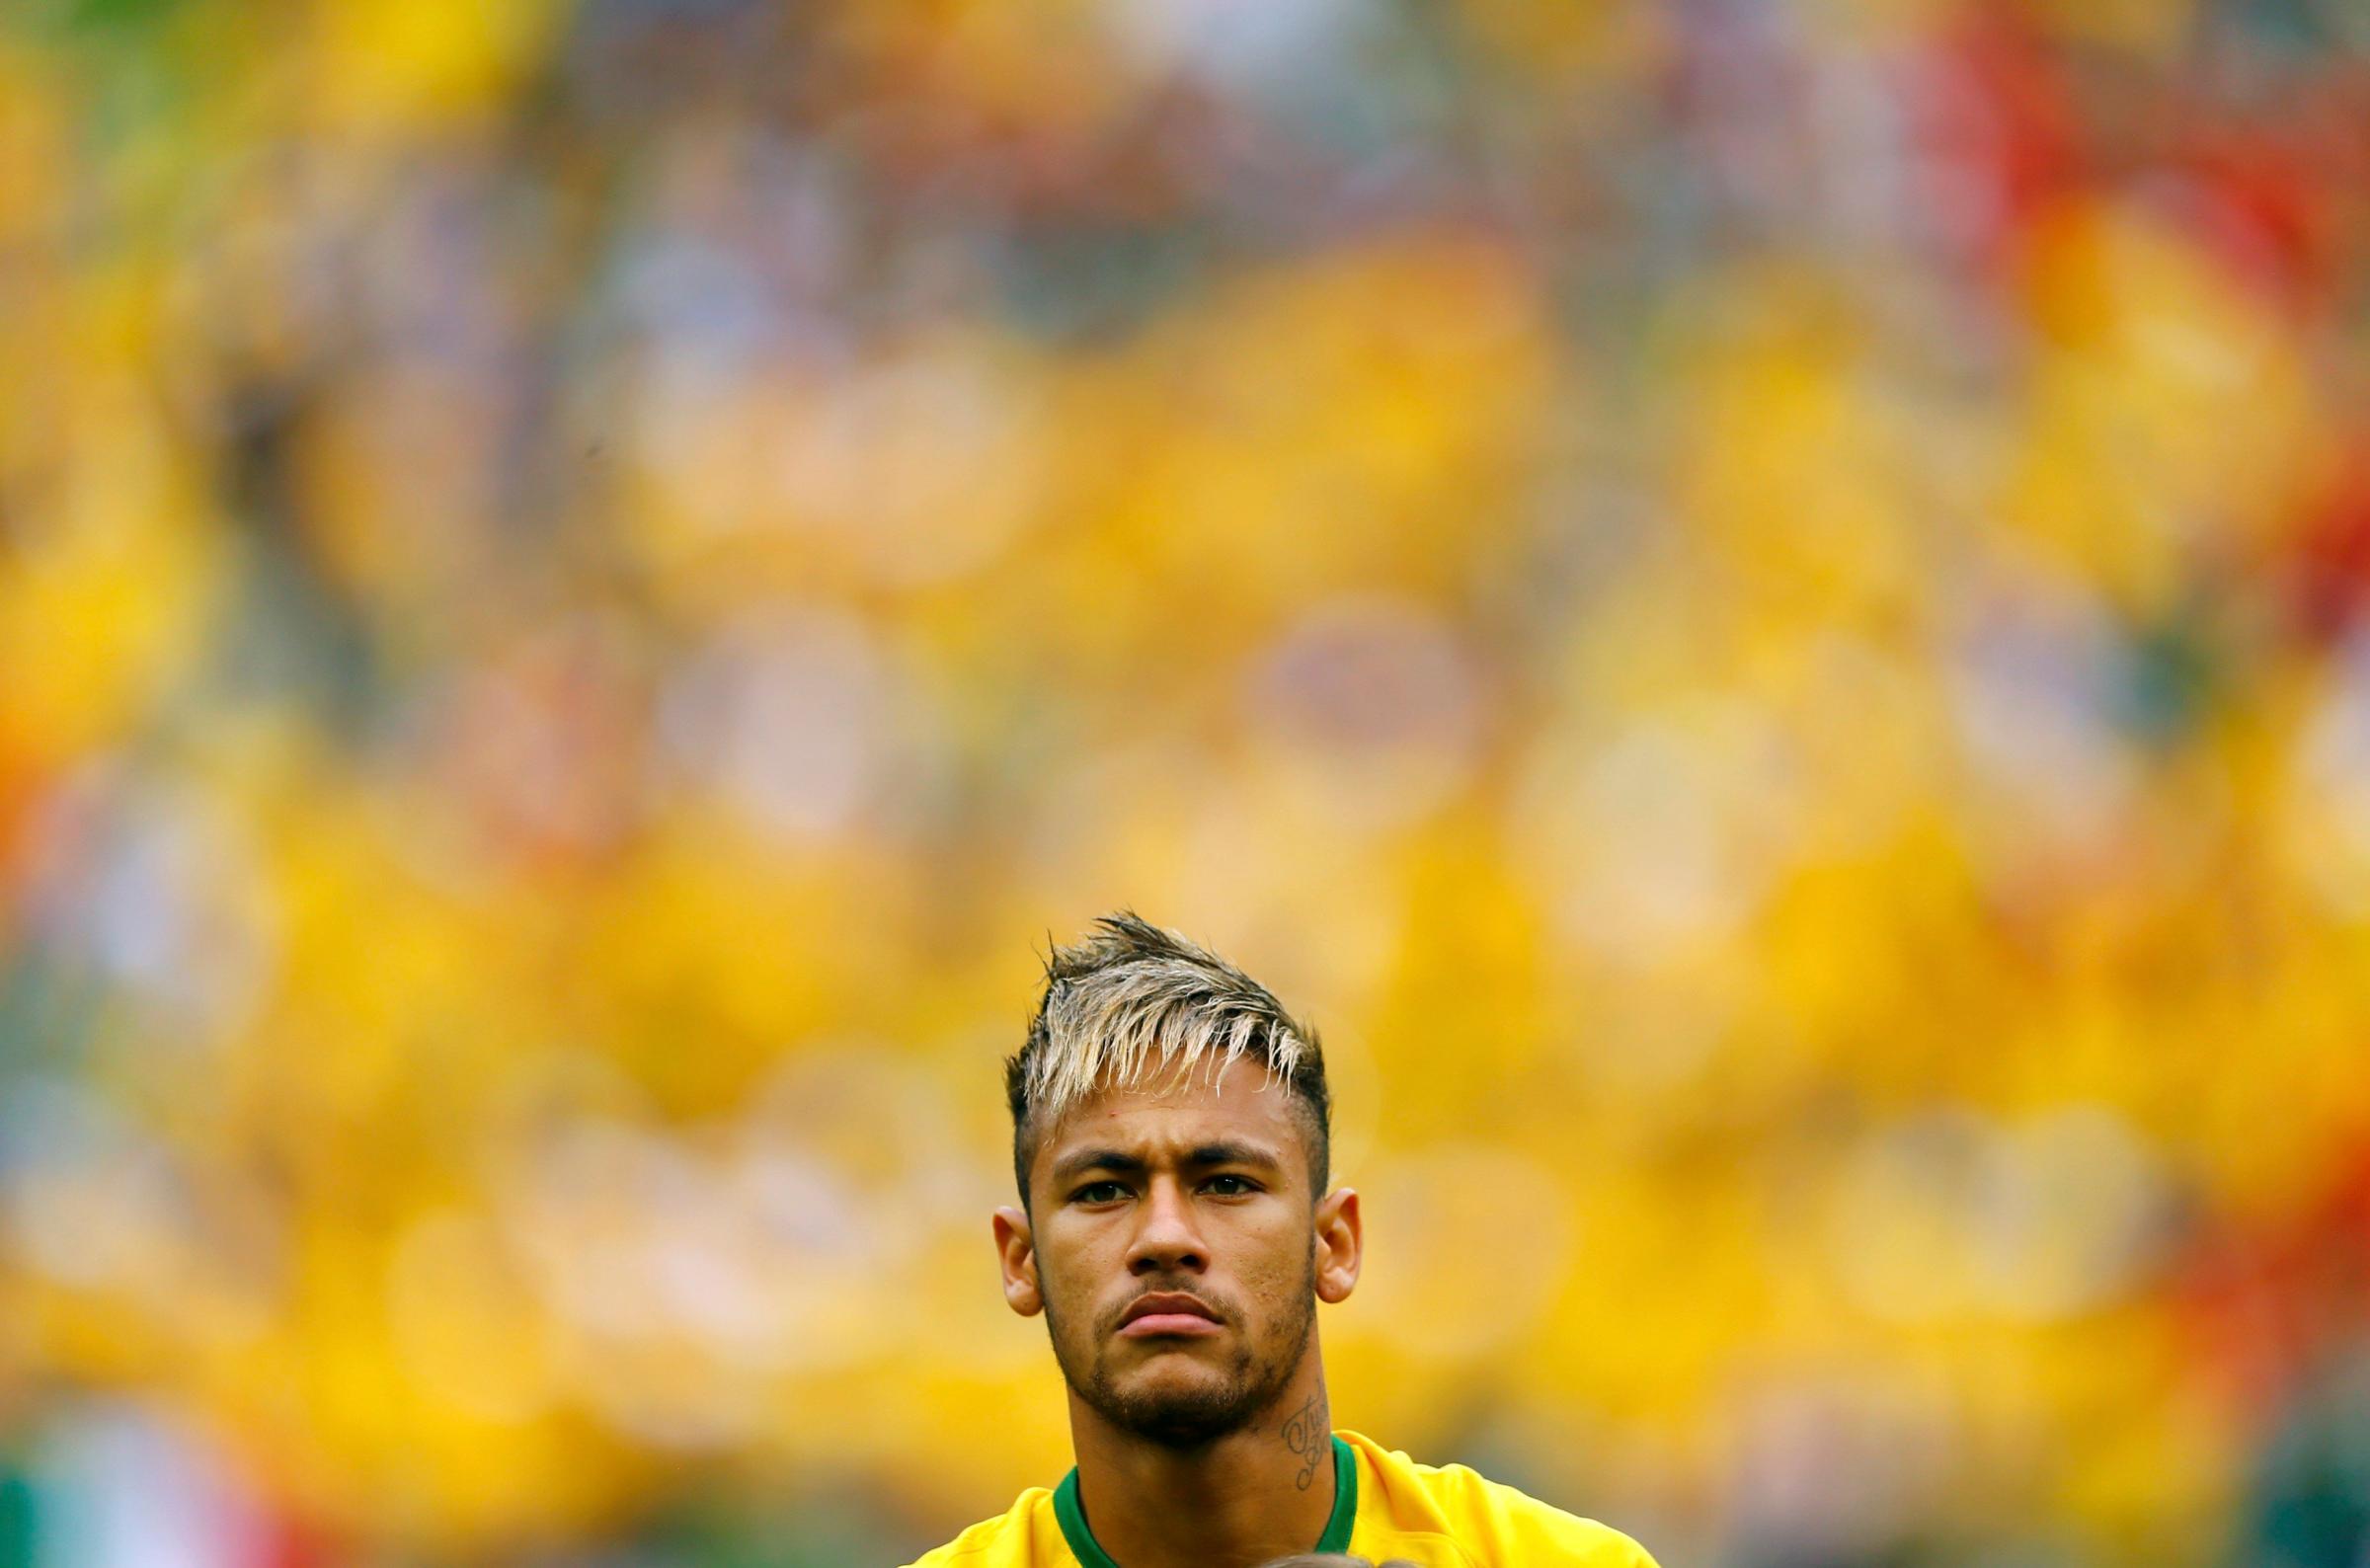 Brazil's Neymar stands during the 2014 World Cup Group A soccer match between Brazil and Mexico at the Castelao arena